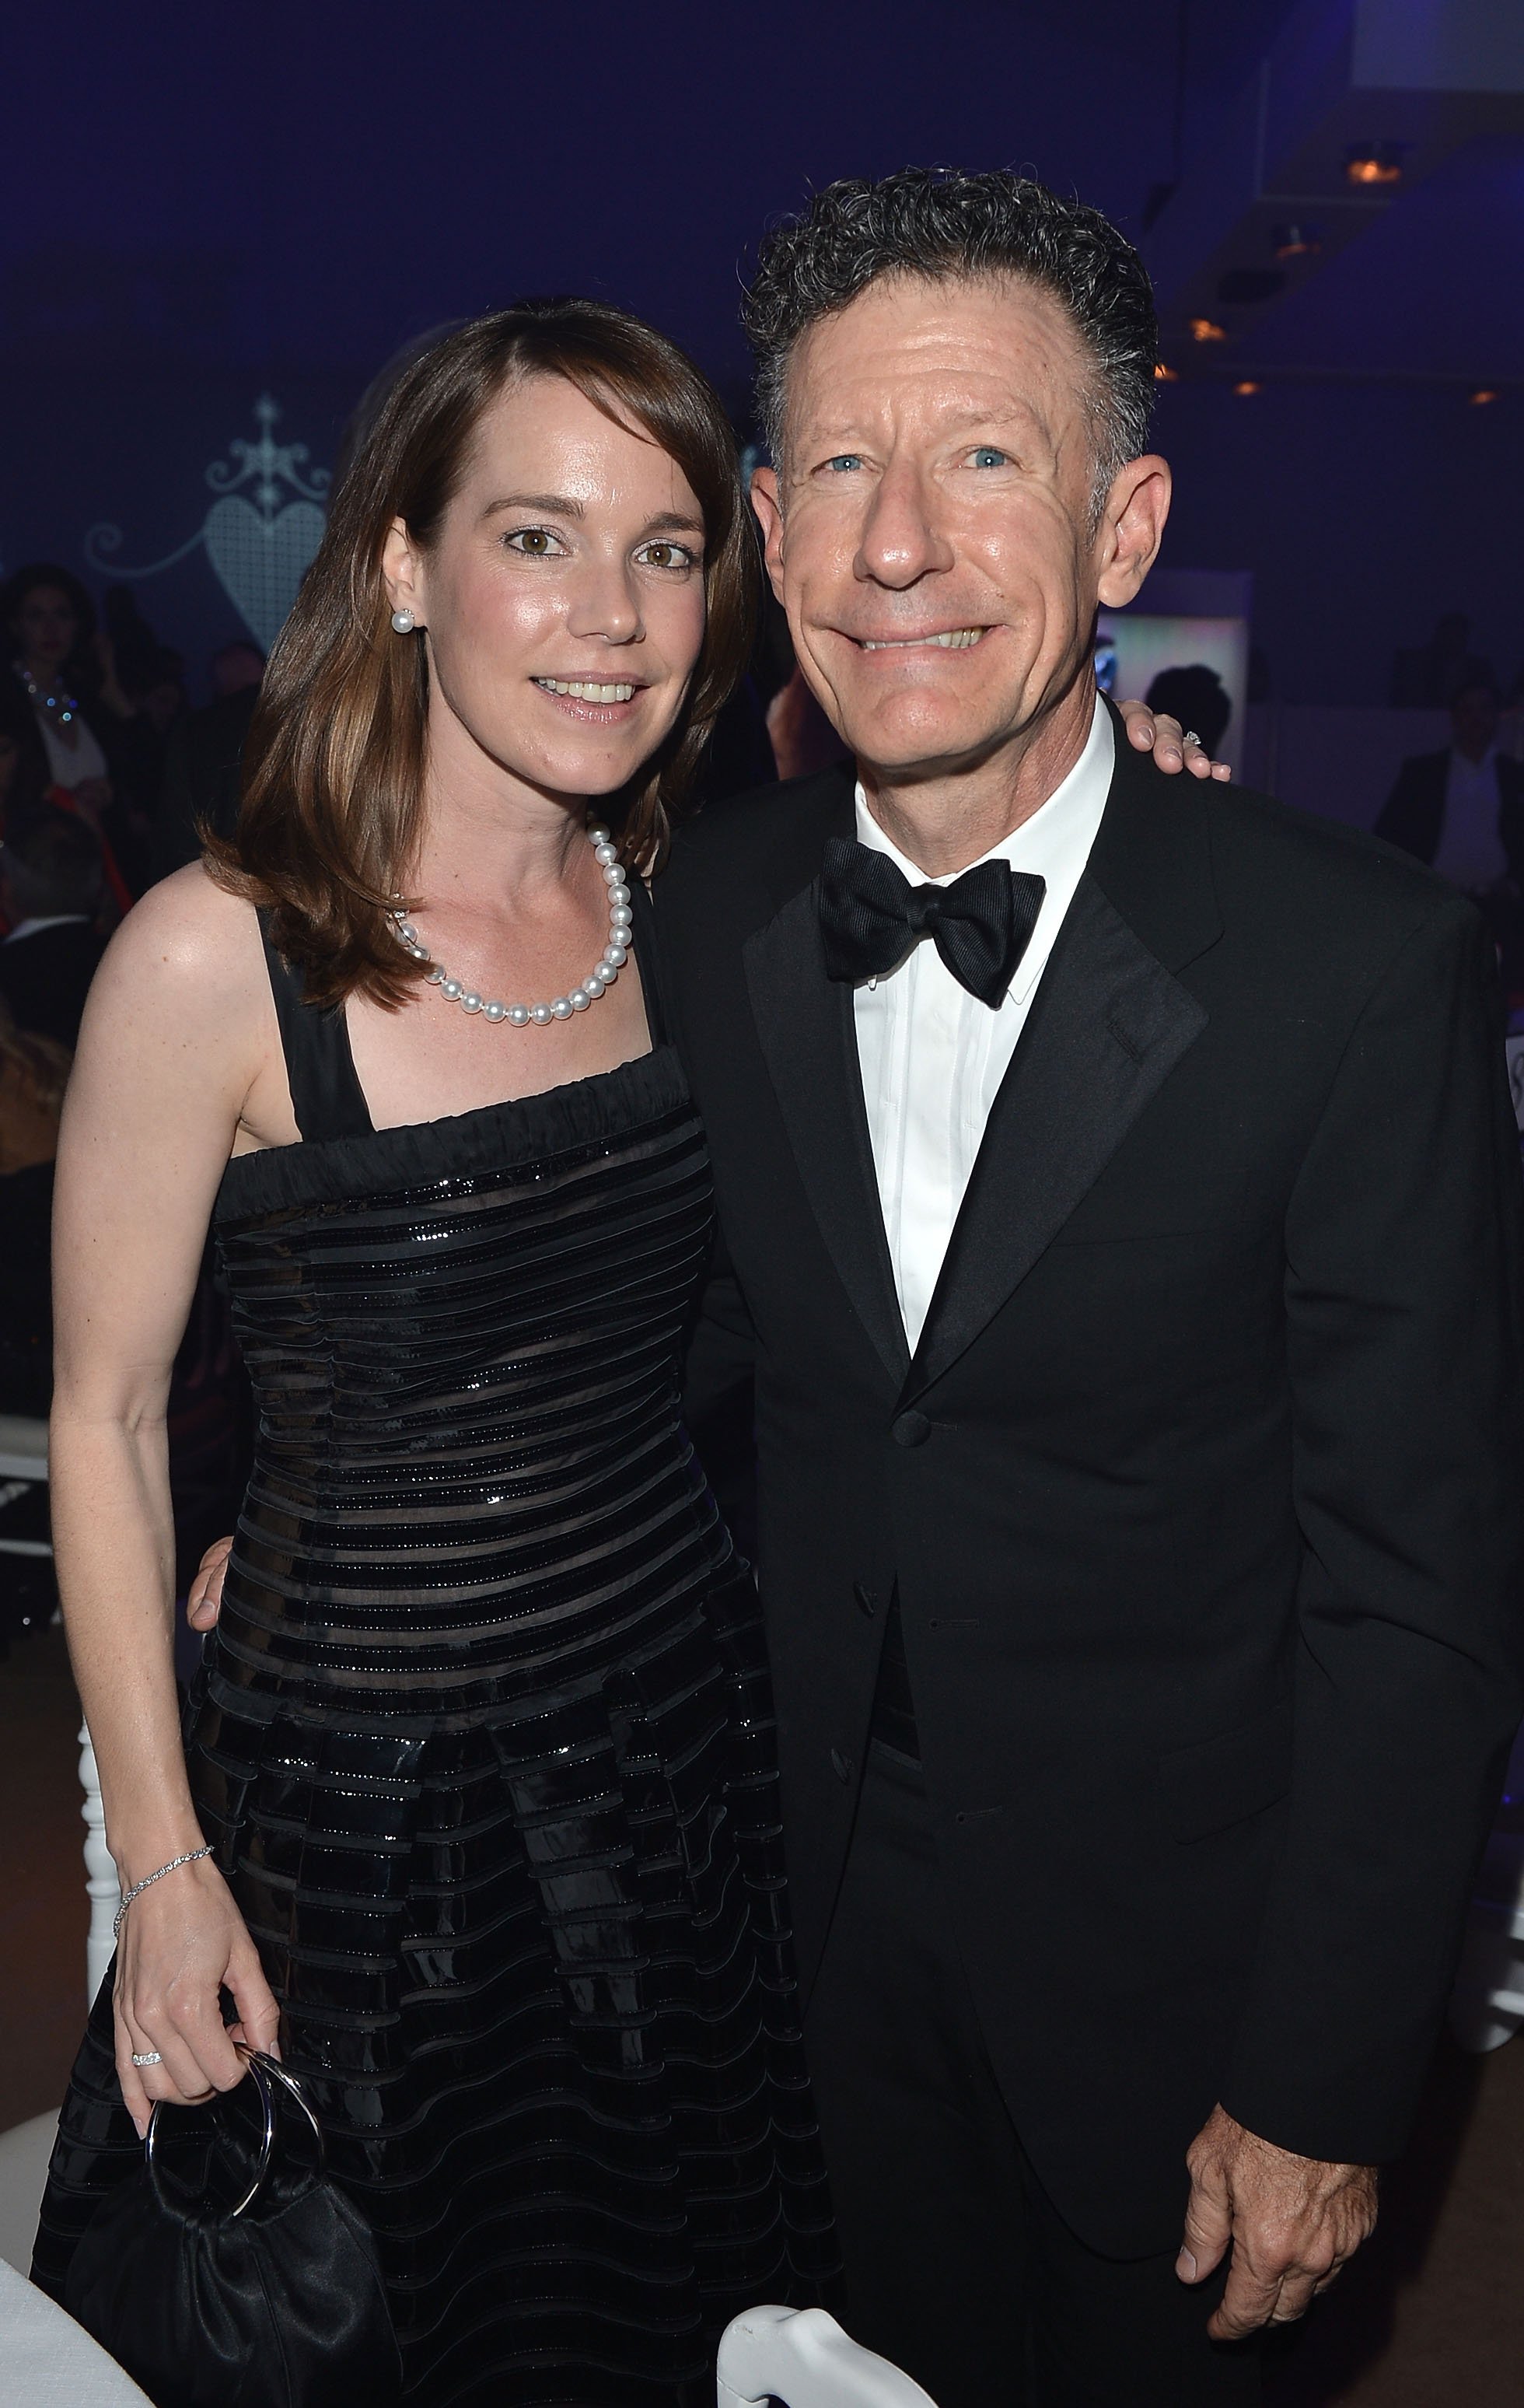 April Kimble and her husband Lyle Lovett attending the Haiti Carnival in Cannes during the 65th Annual Cannes Film Festival on May 18, 2012 in Cannes, France. / Source: Getty Images